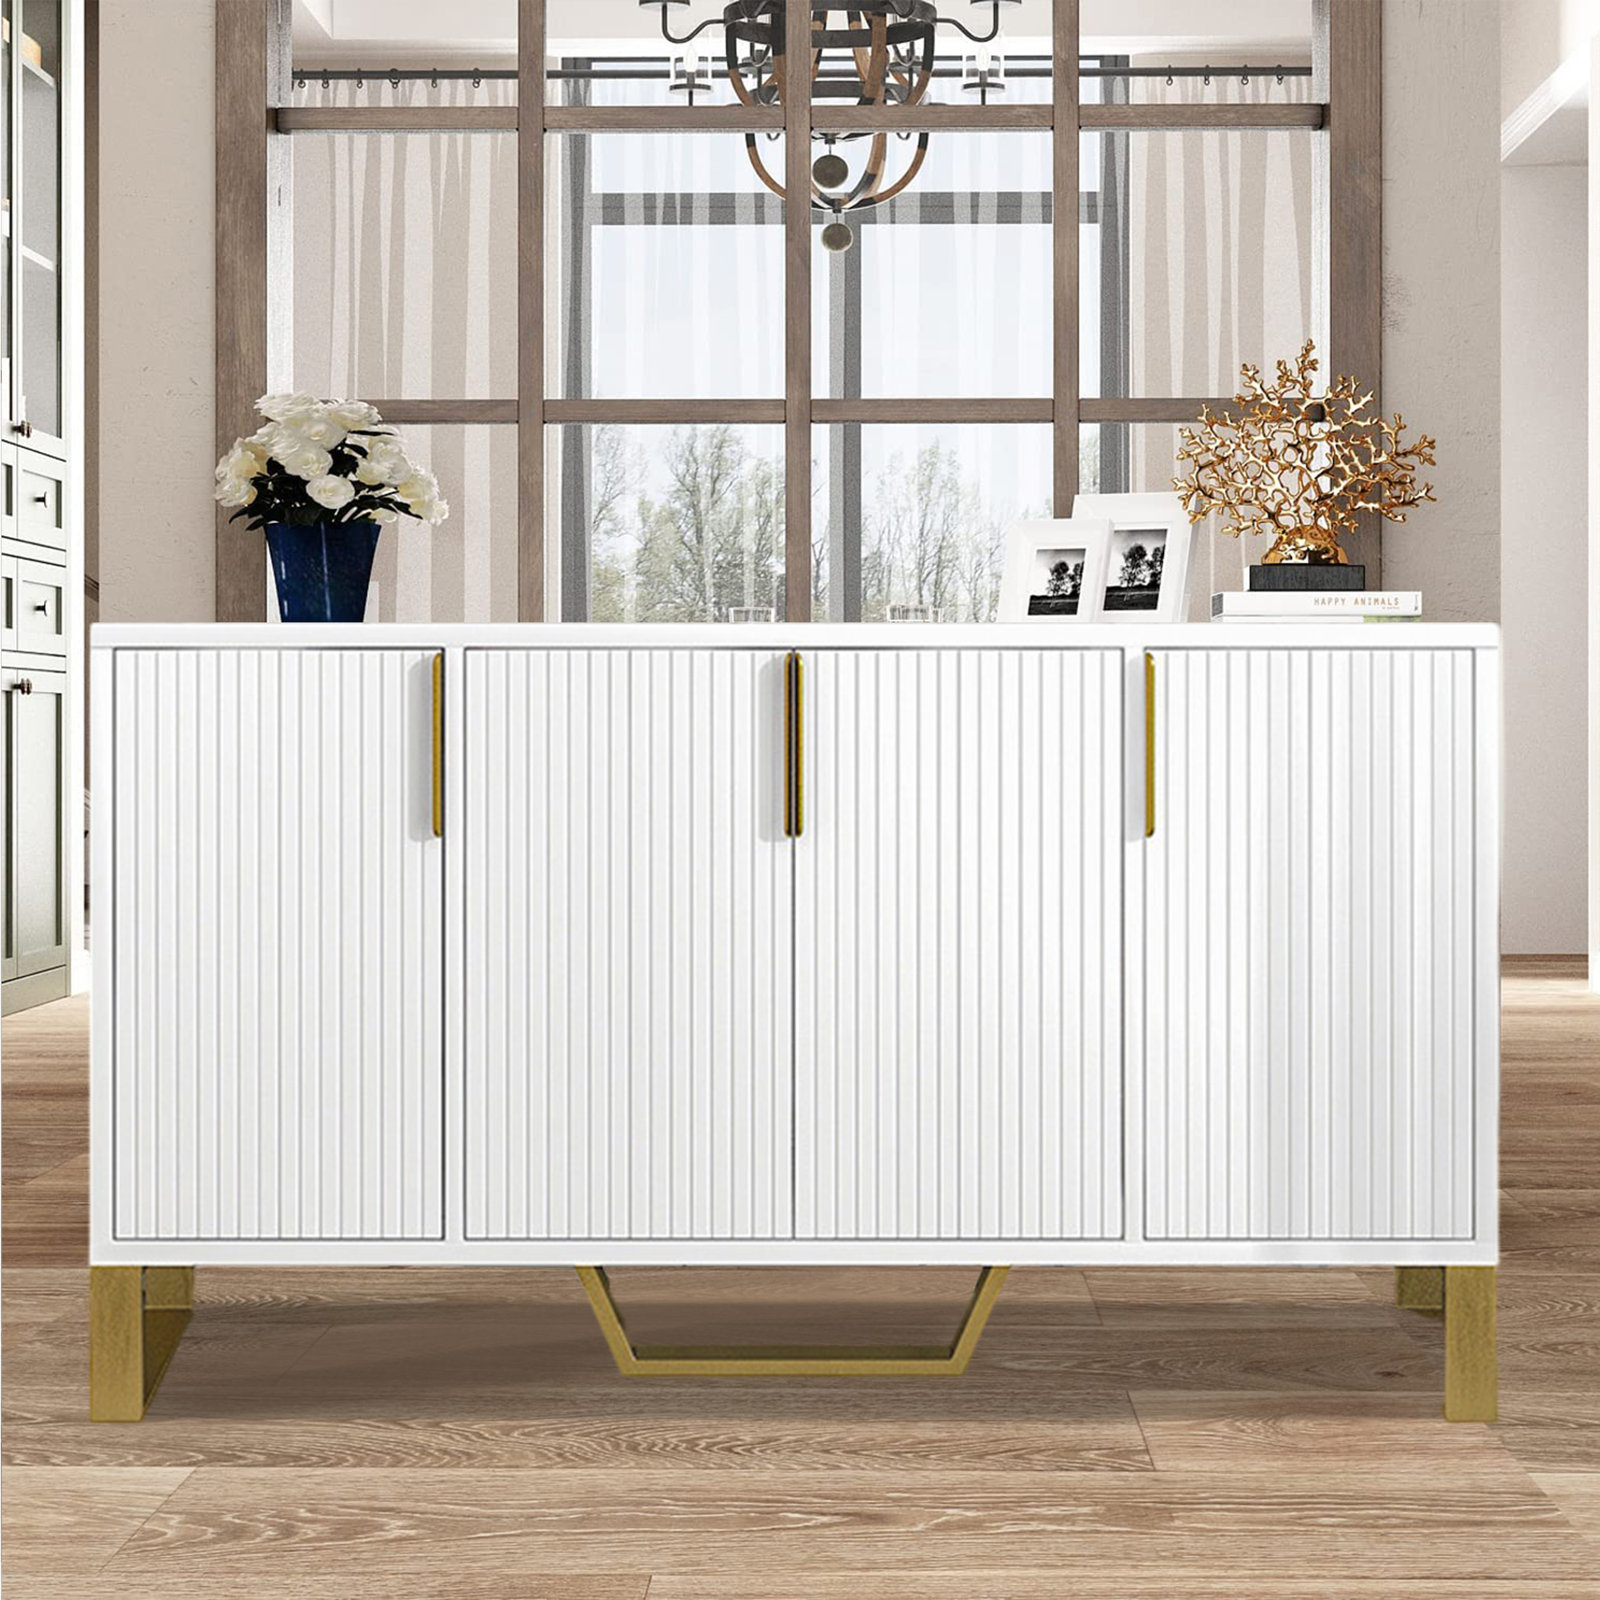 Everly Quinn Aycan 60'' Wide Sideboard